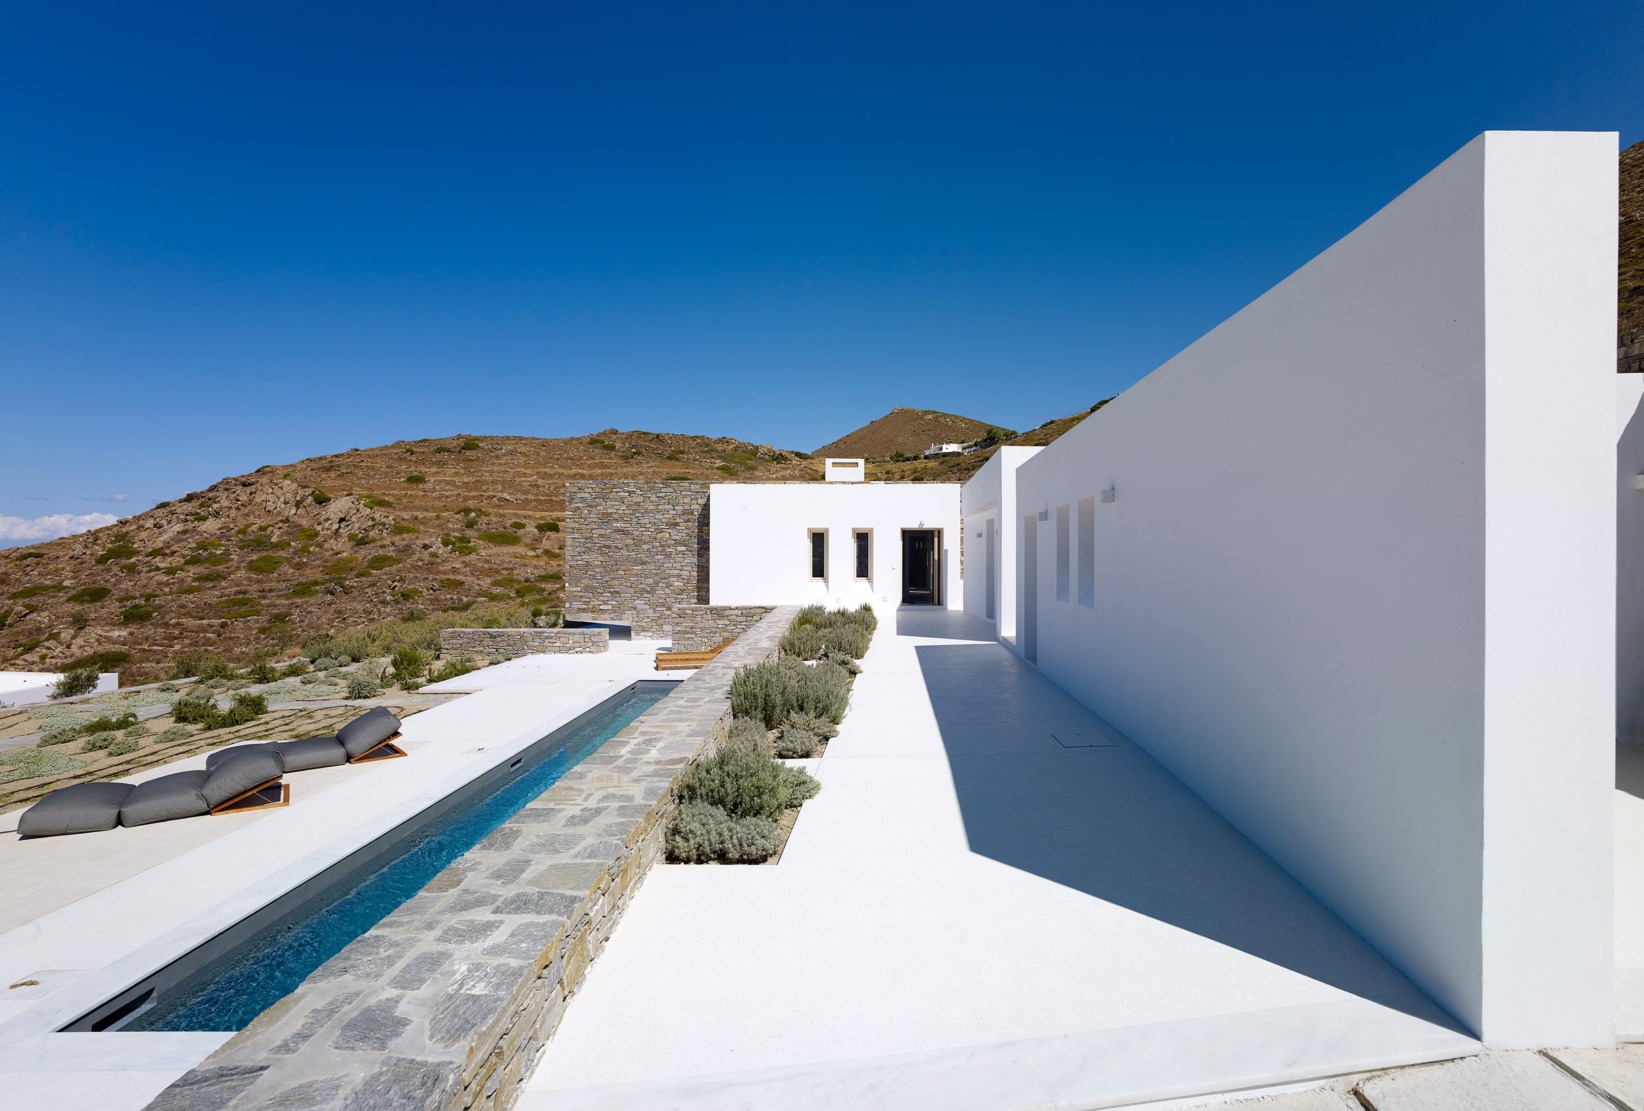 Evripiotis Architects-As House featured on Archdaily